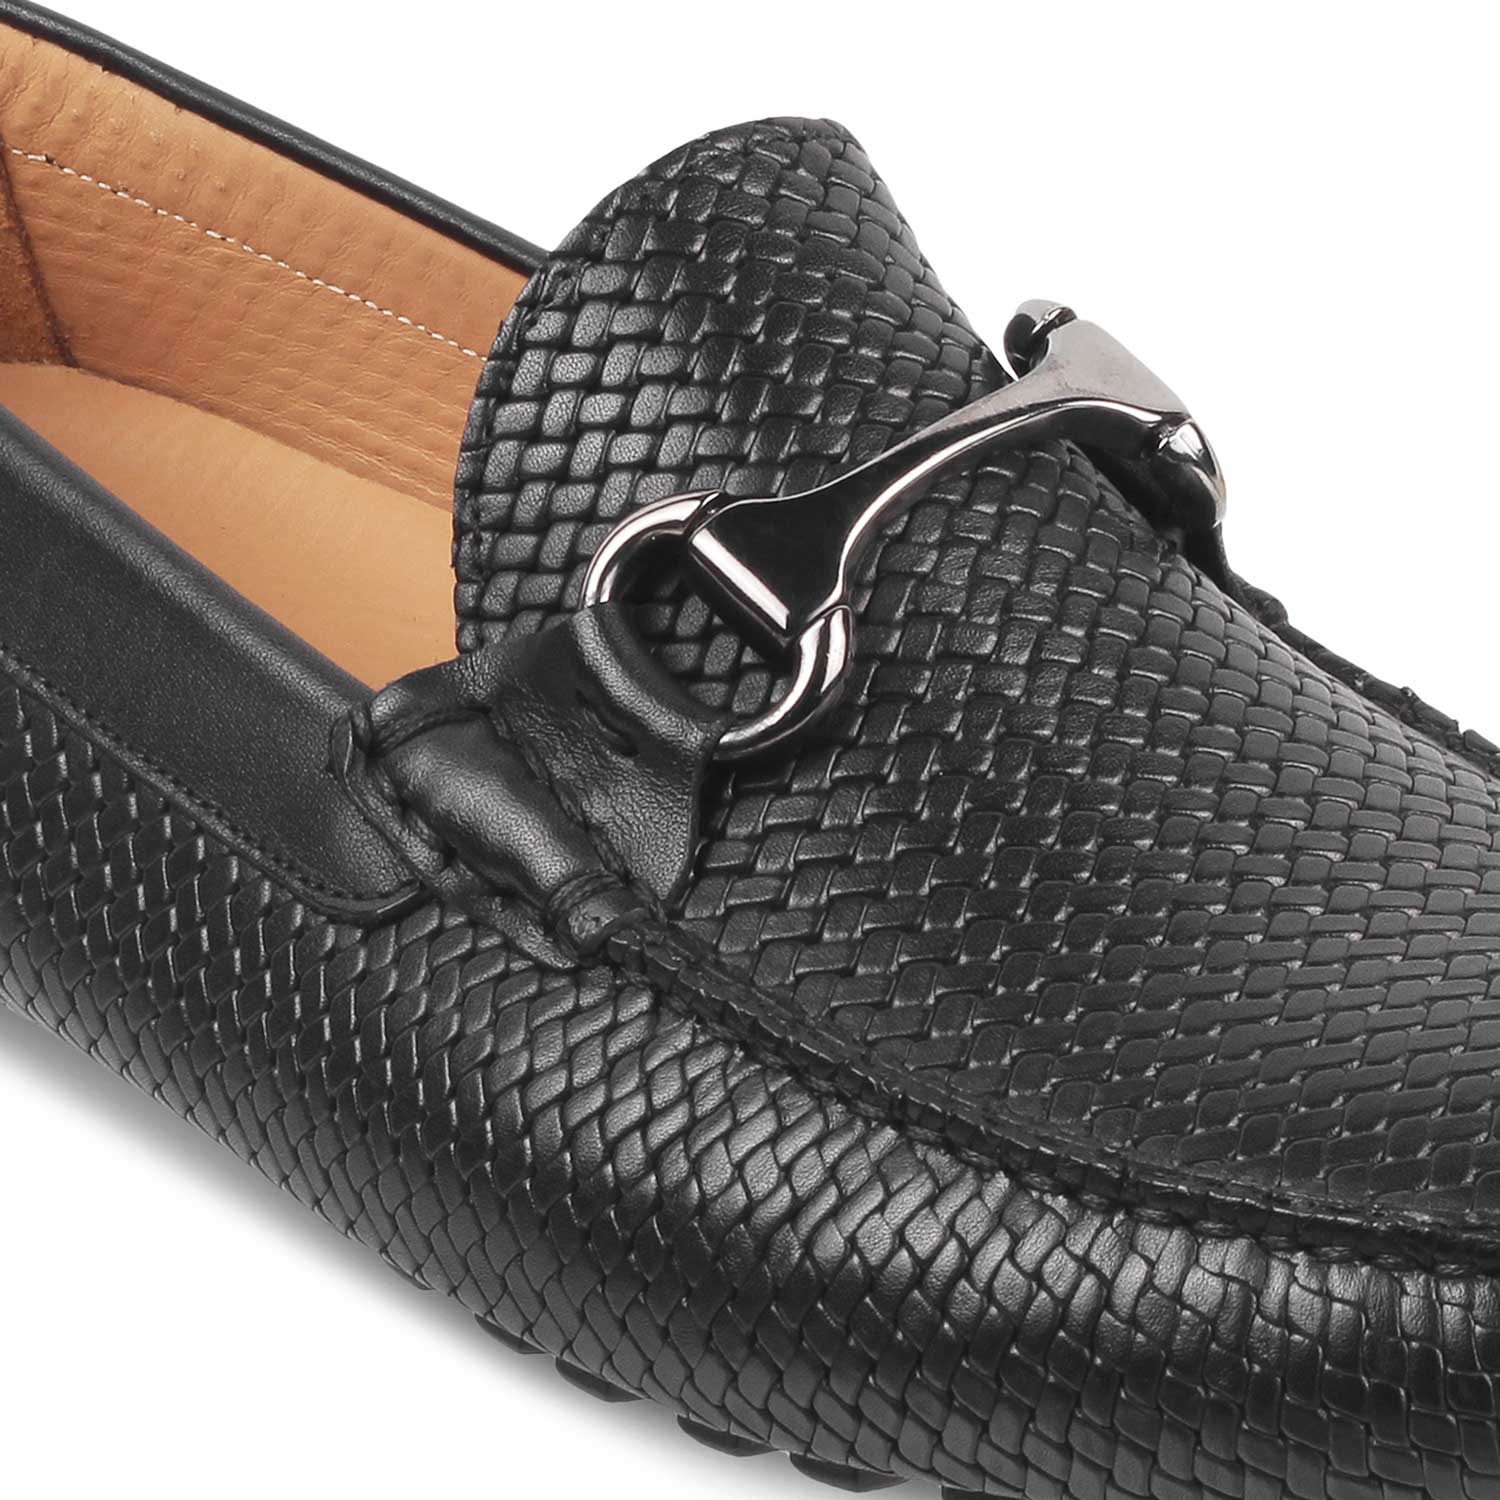 Tresmode-The Monaco-2 Black Men's Handcrafted Leather Driving Loafers Tresmode-Tresmode